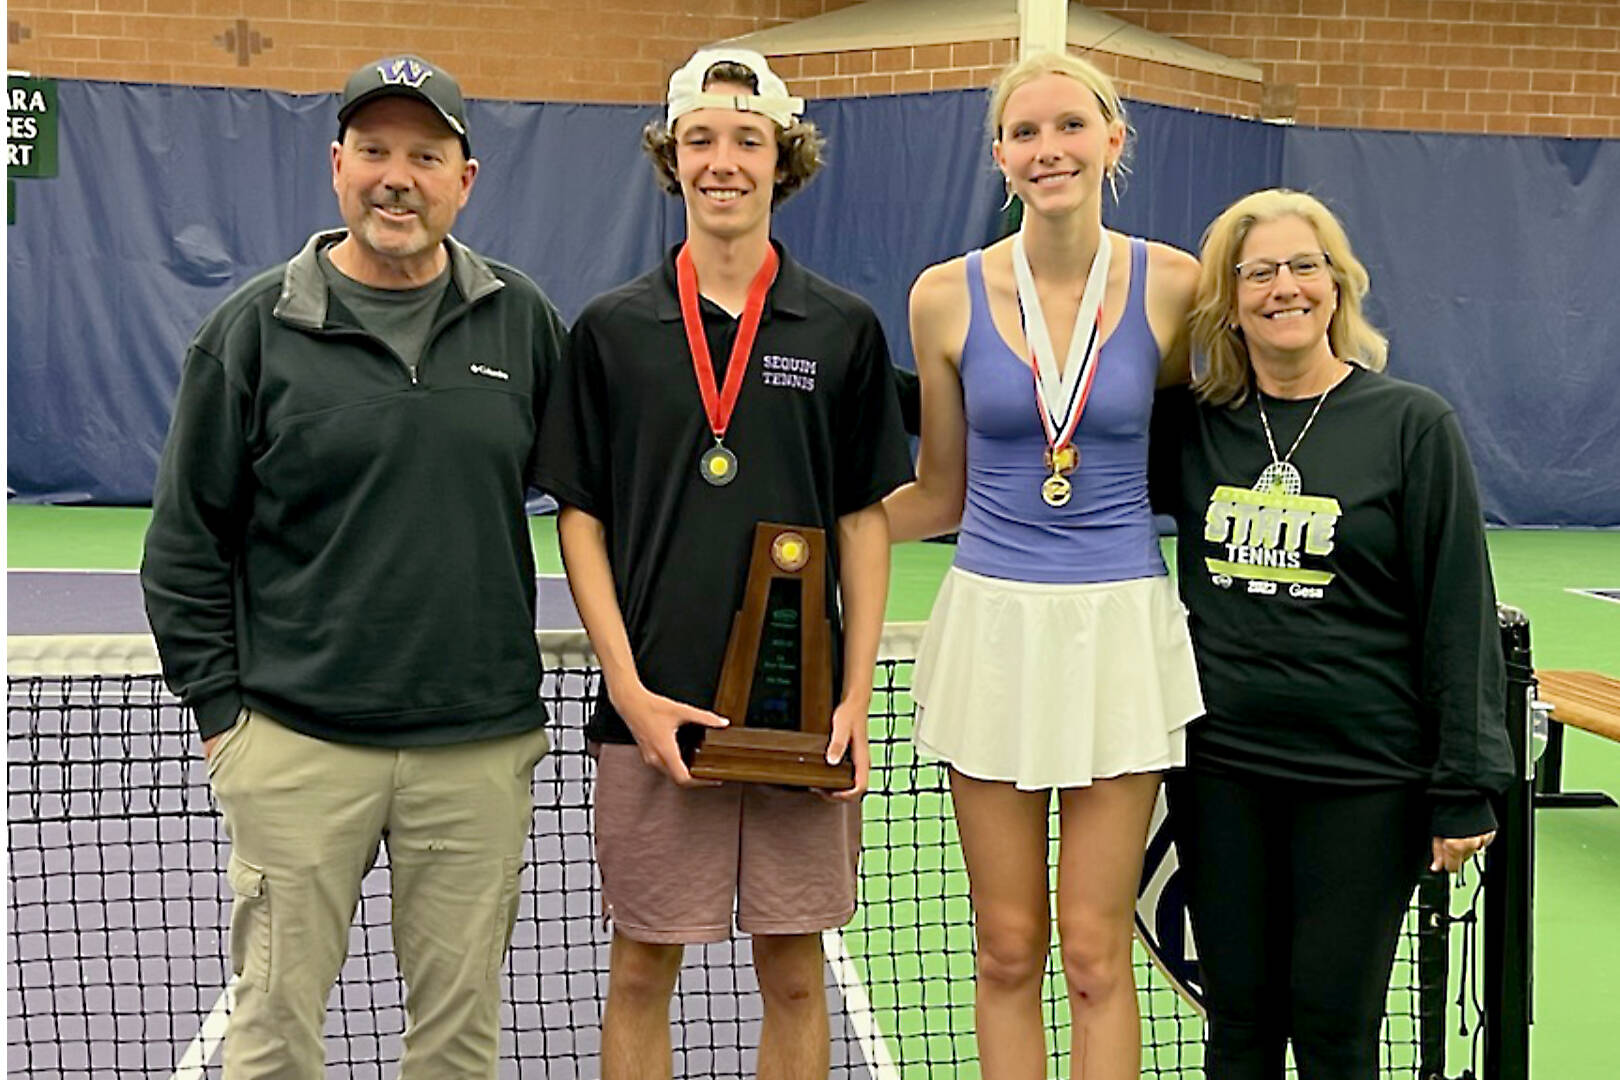 Sequim tennis coach Mark Textor, left celebrates Sequim's two high finishes at state second-place boys' finisher Garrett Little and third-place girls' finisher Kendall Hastings. Assistant coach Andrea Dietzman is at the right. (Courtesy photo).